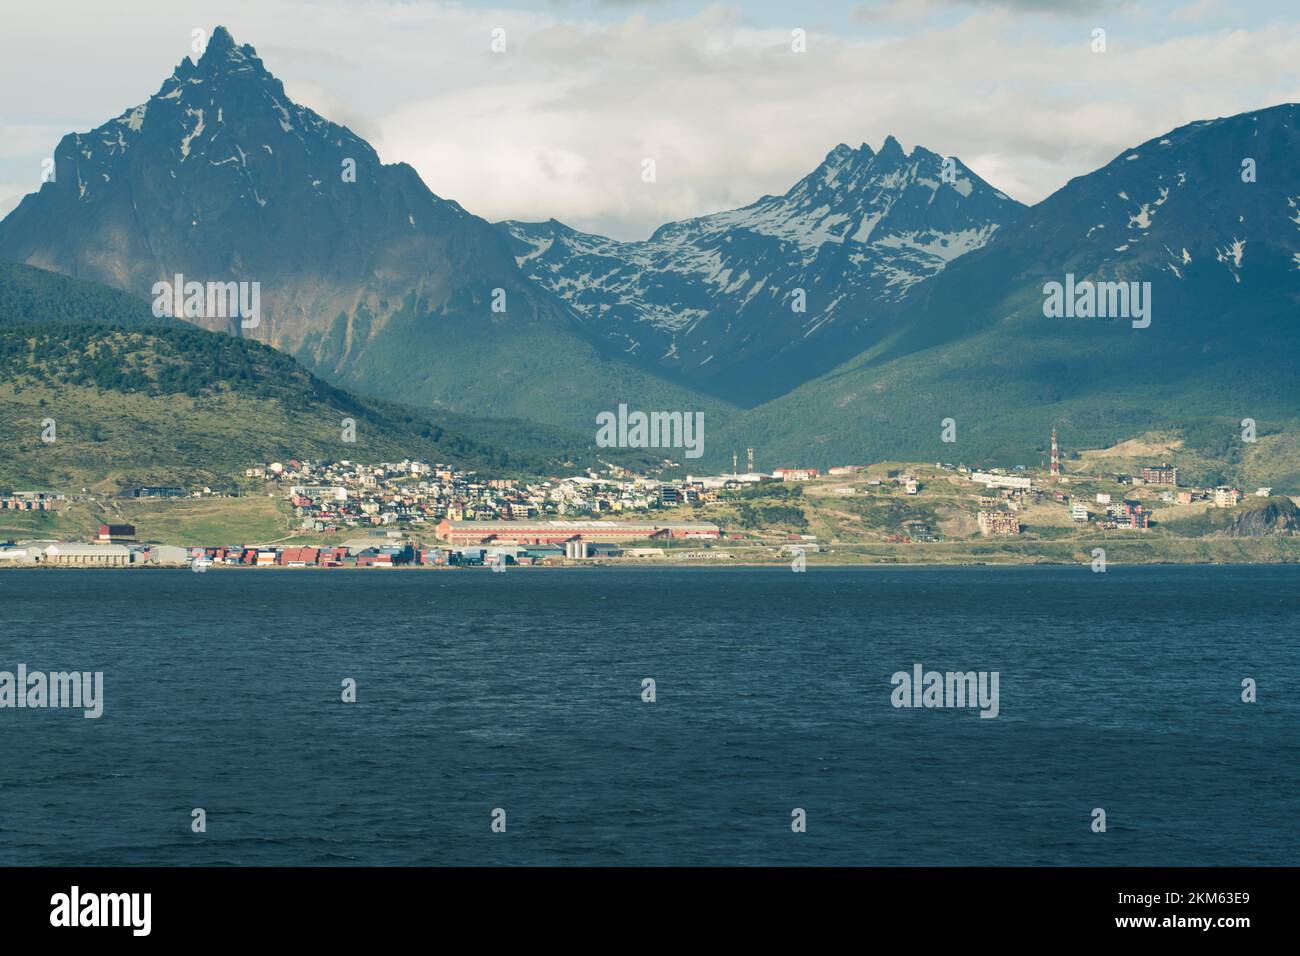 View of the Martial Mountains and the city of Ushuaia, Argentina. Taken from a boat sailing on the Beagle Channel. Stock Photo